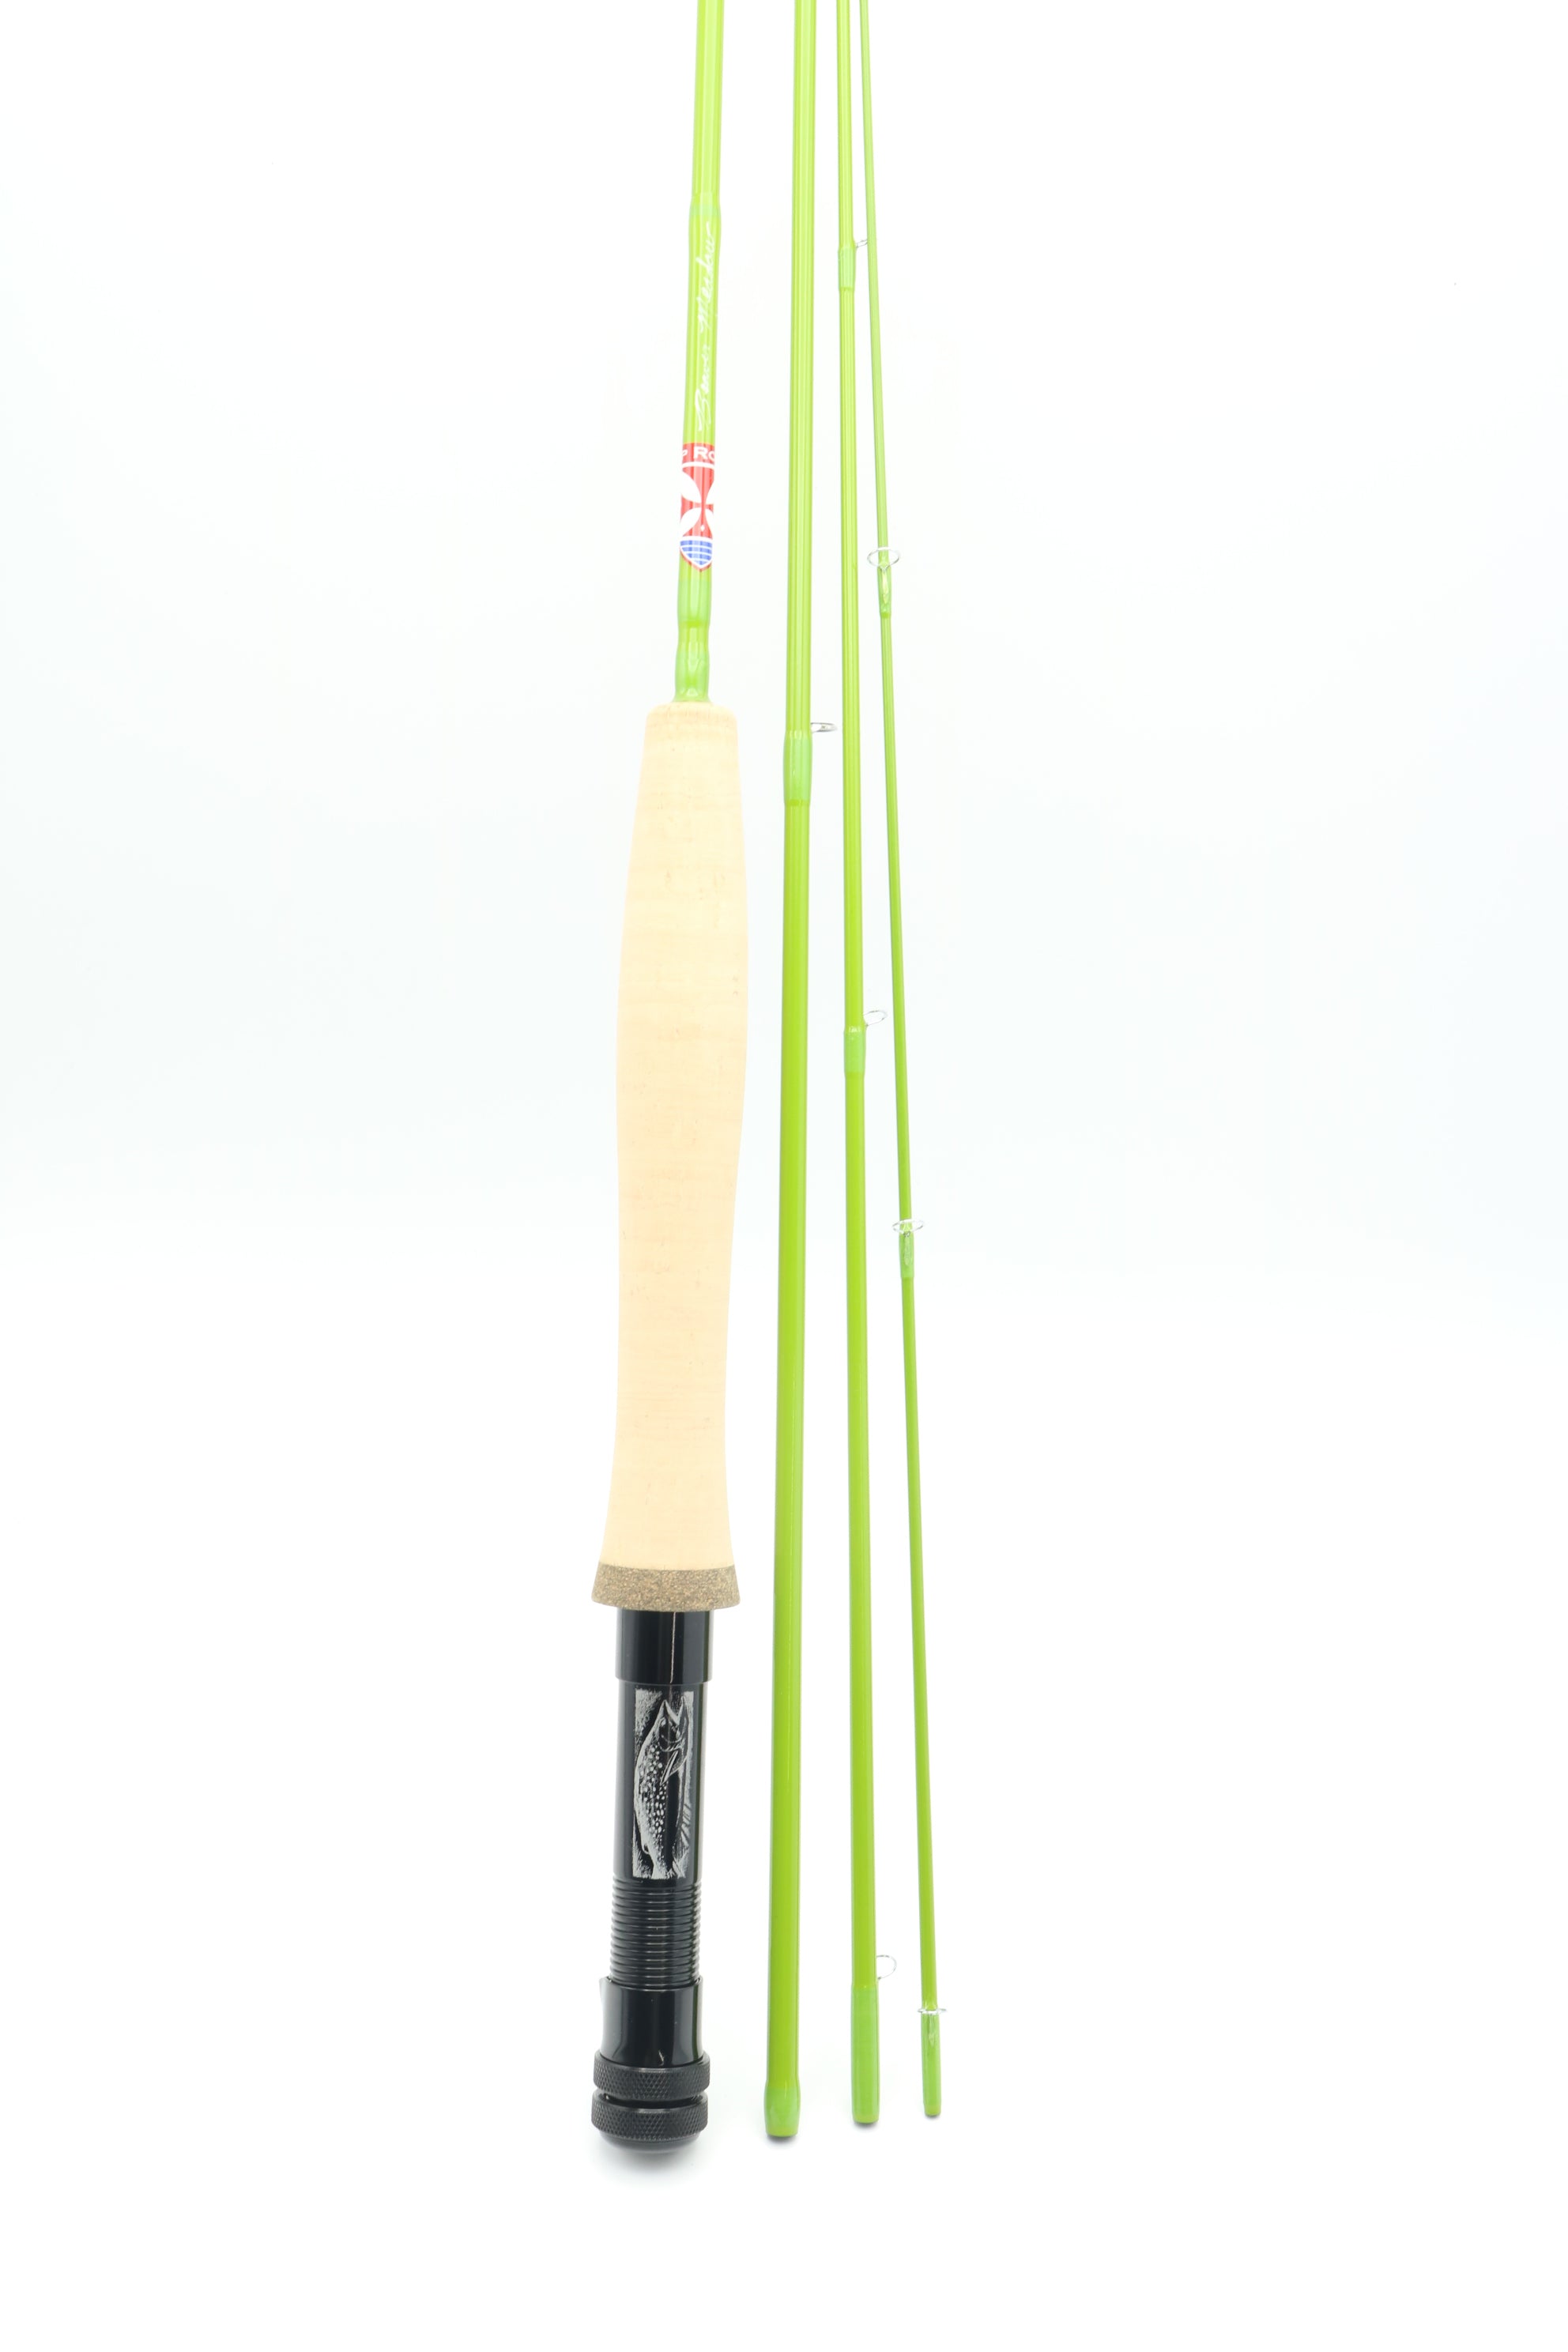 Beaver Meadow Adams Rod and Outfits, refined, simple, & value priced.